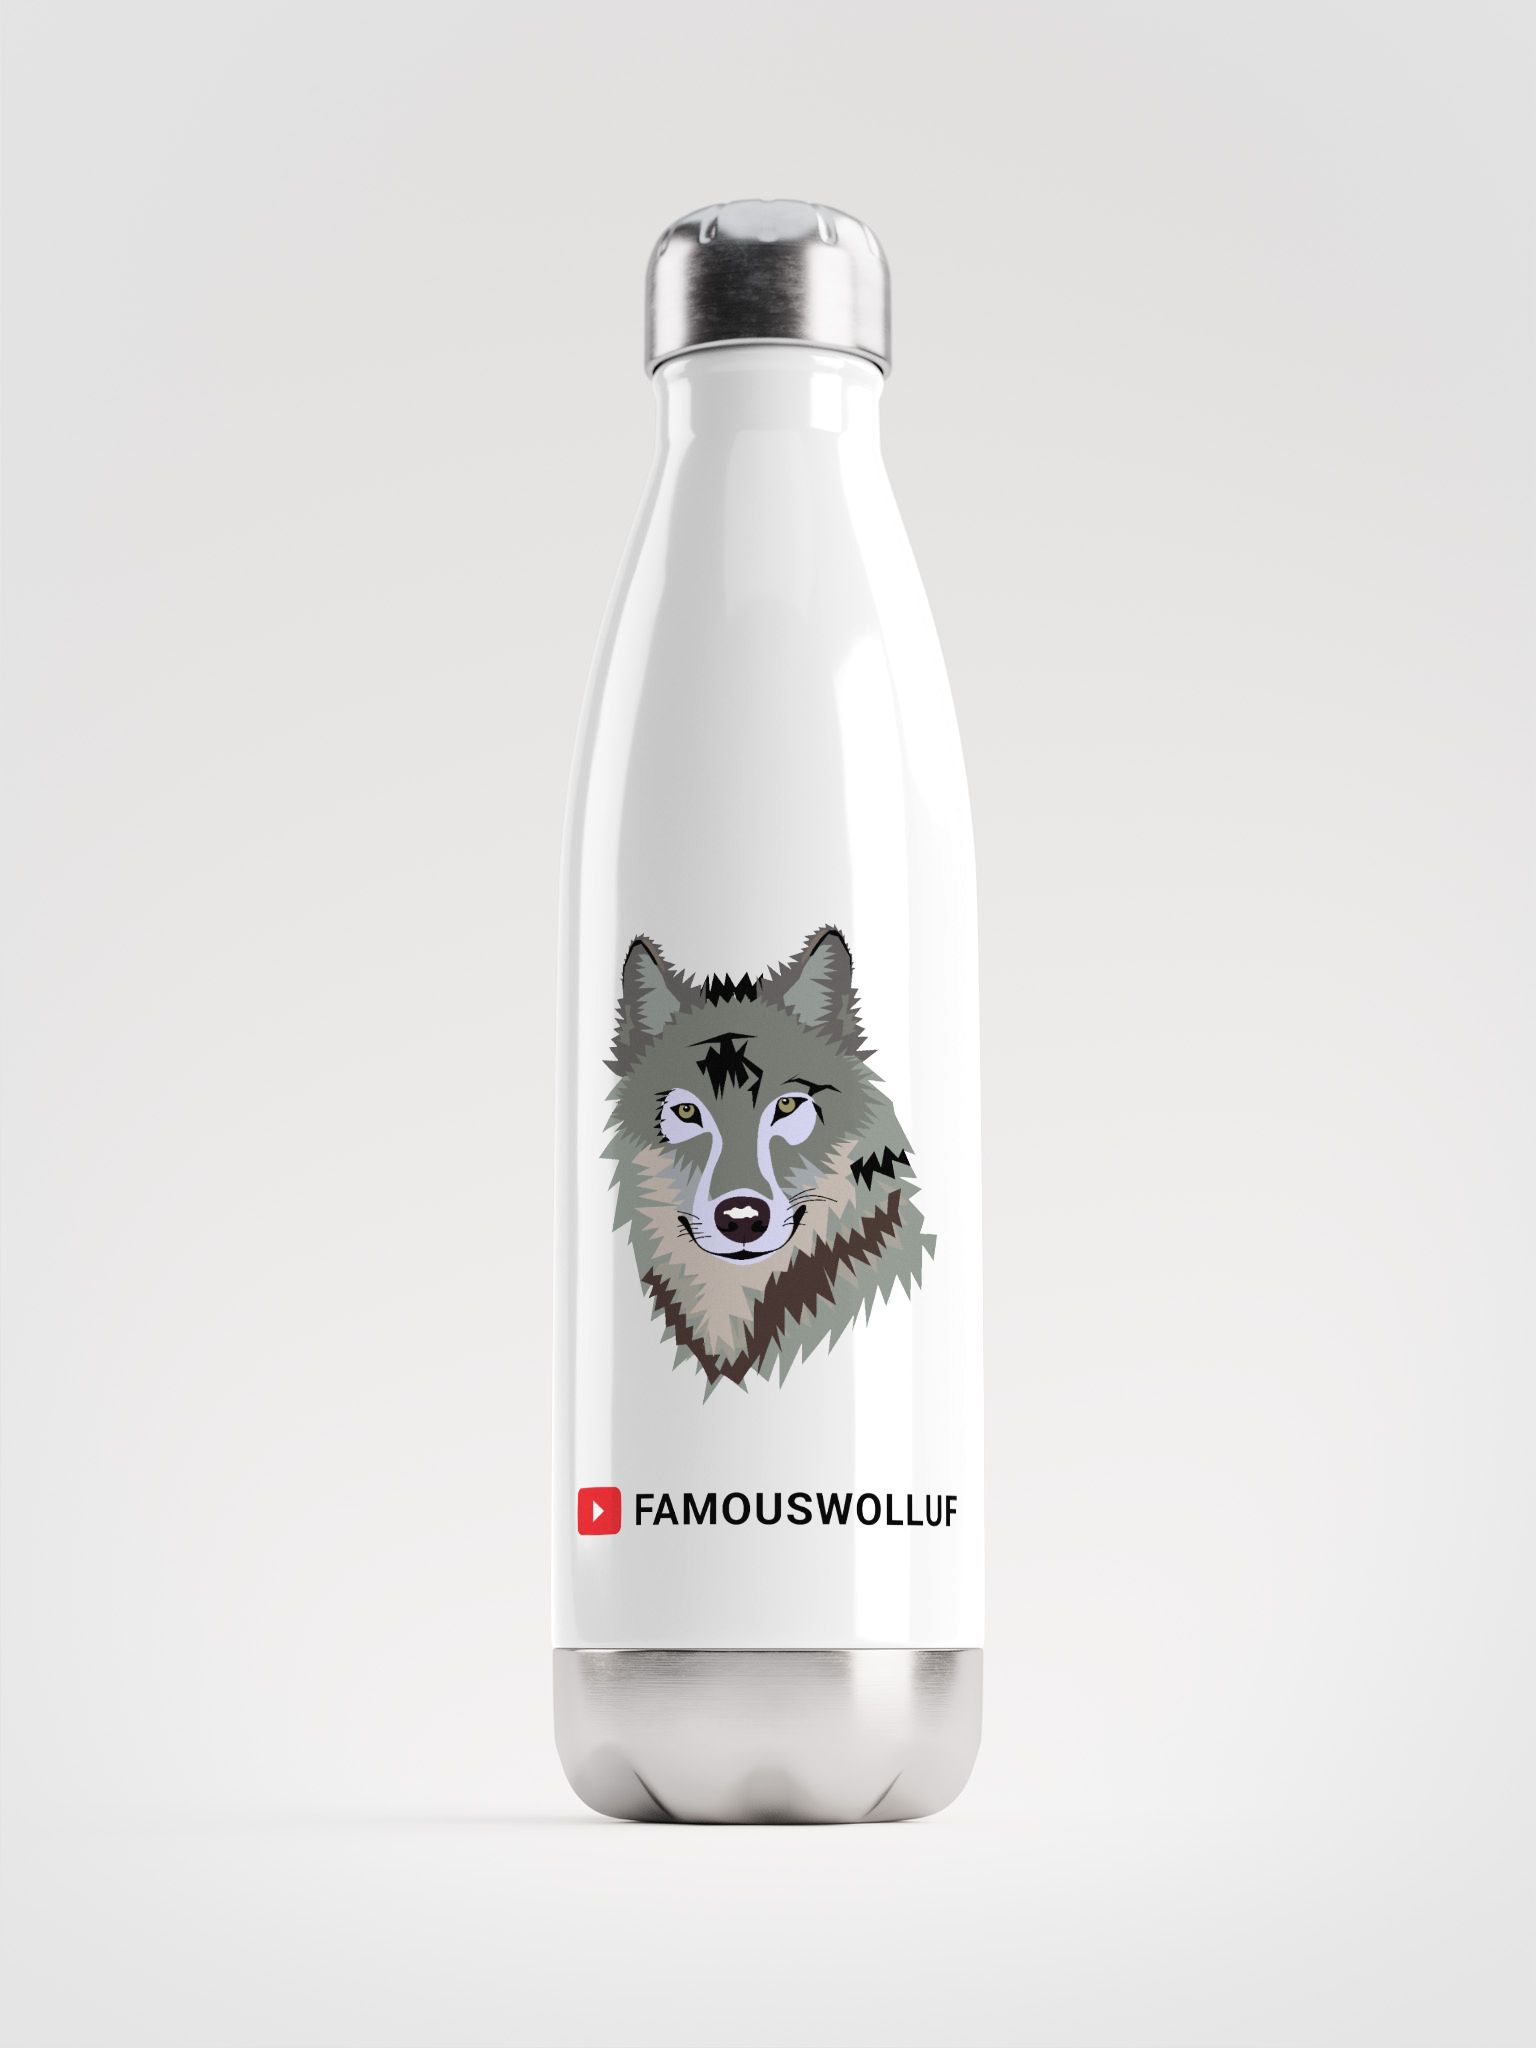 🥤Stanley Water Bottle Famous Brand From America💥, Gallery posted by  Naná🫧🧤